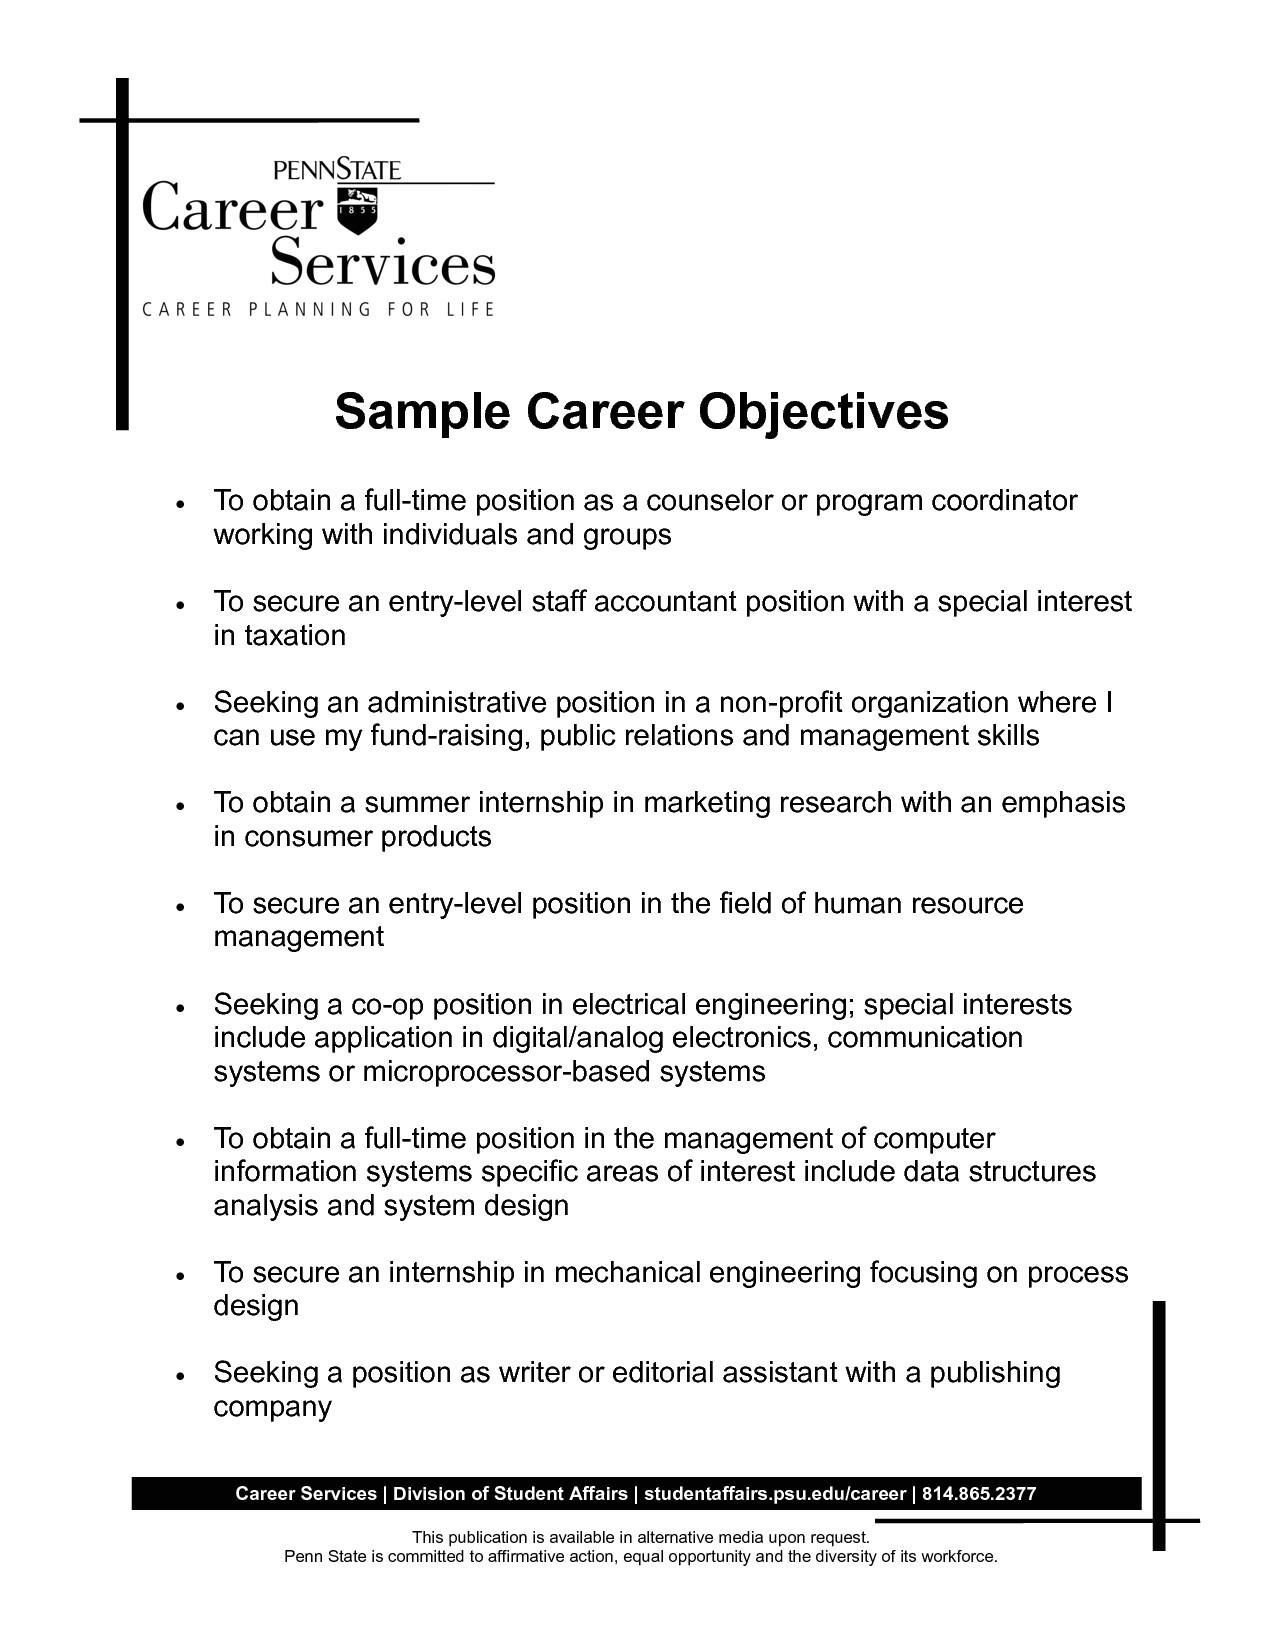 how to write career objective with sample